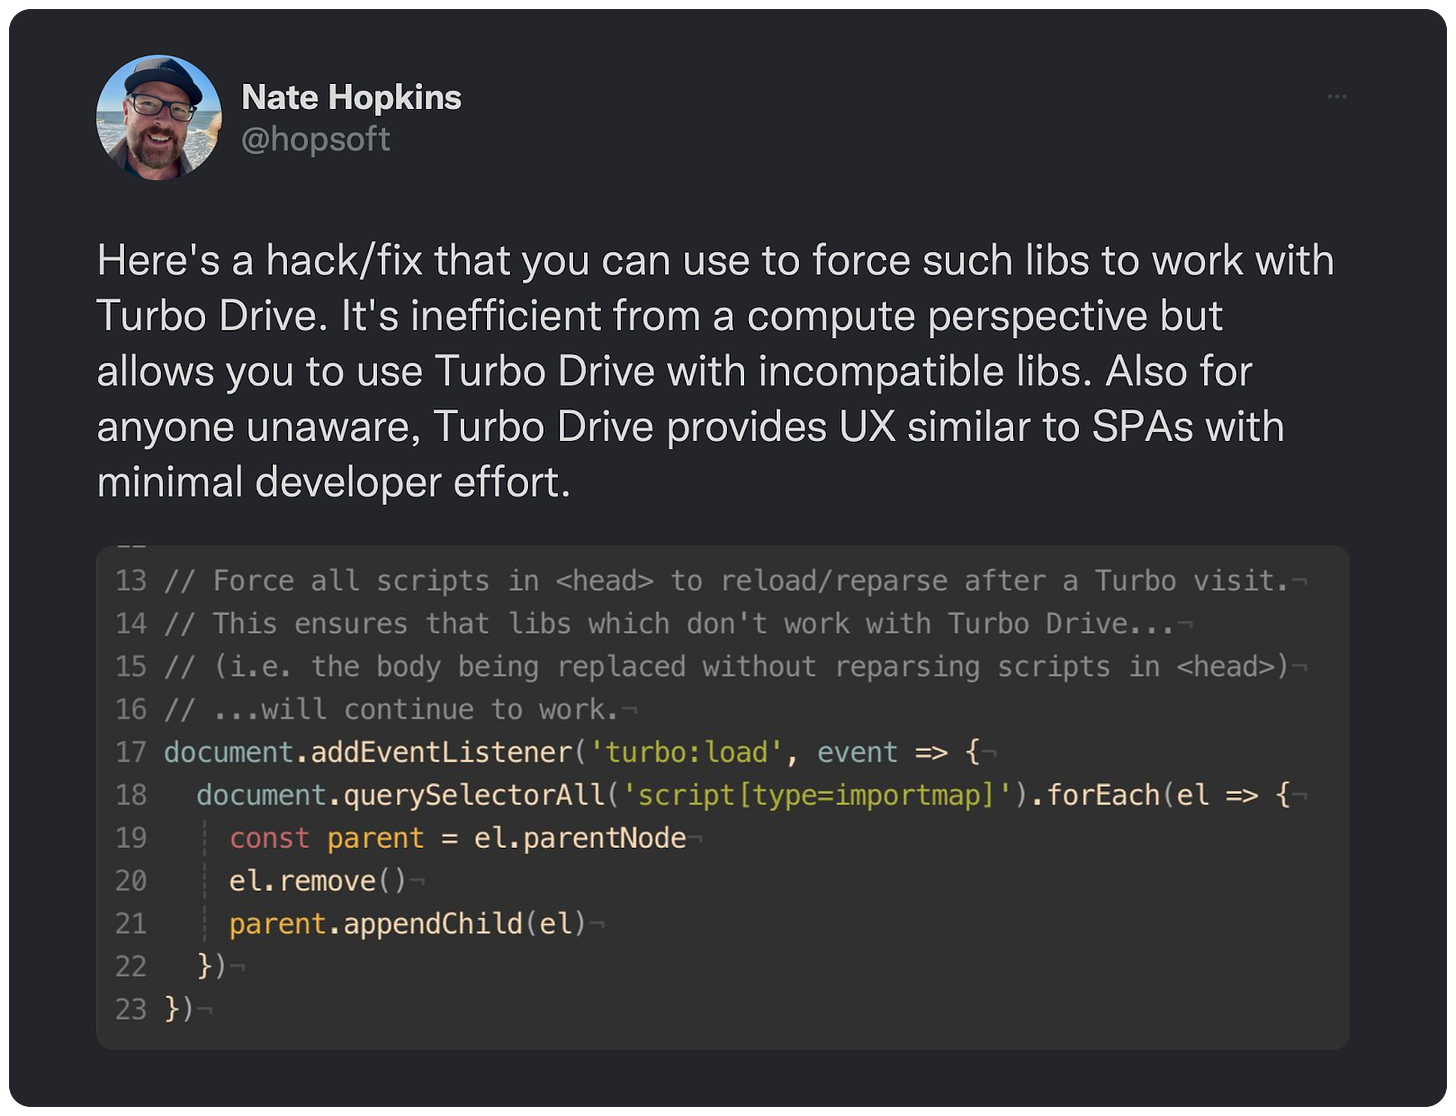 Here's a hack/fix that you can use to force such libs to work with Turbo Drive. It's inefficient from a compute perspective but allows you to use Turbo Drive with incompatible libs. Also for anyone unaware, Turbo Drive provides UX similar to SPAs with minimal developer effort.